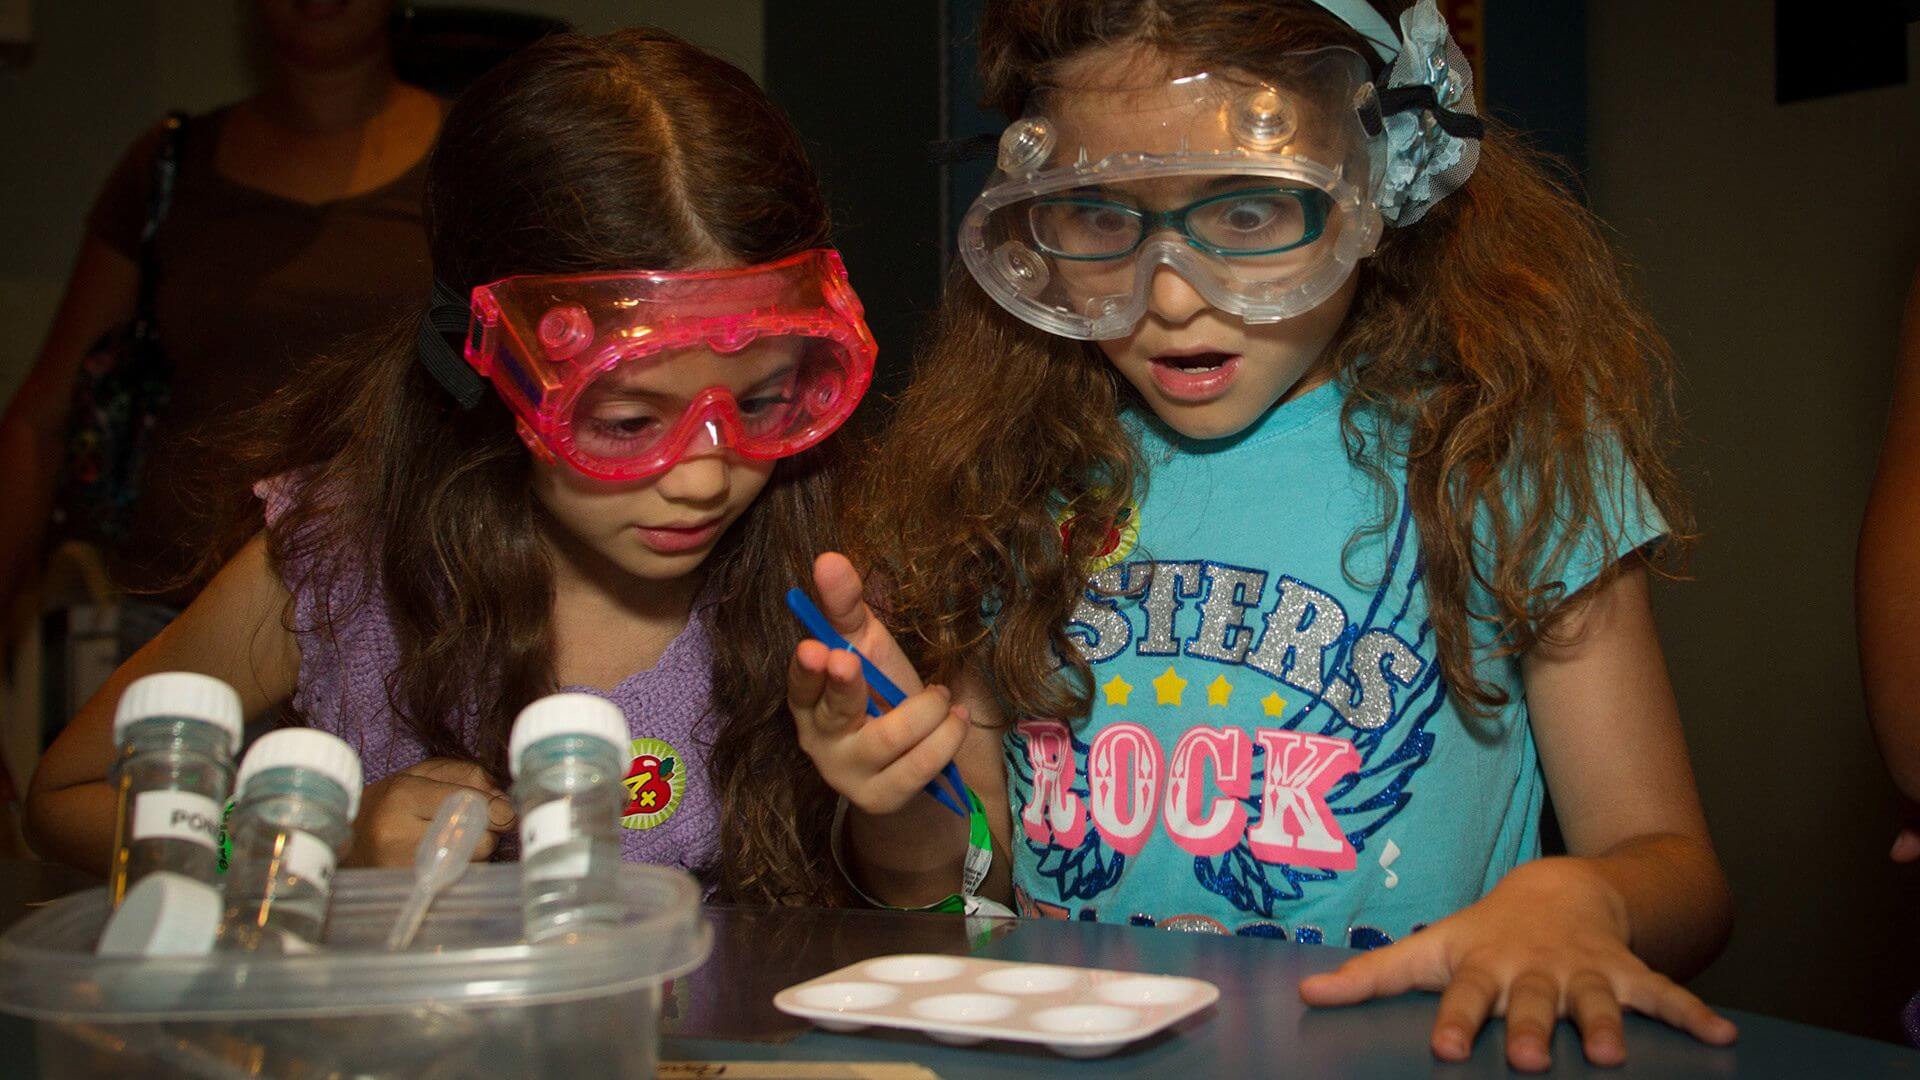 Two young girls in awe of a science experiment they're working on